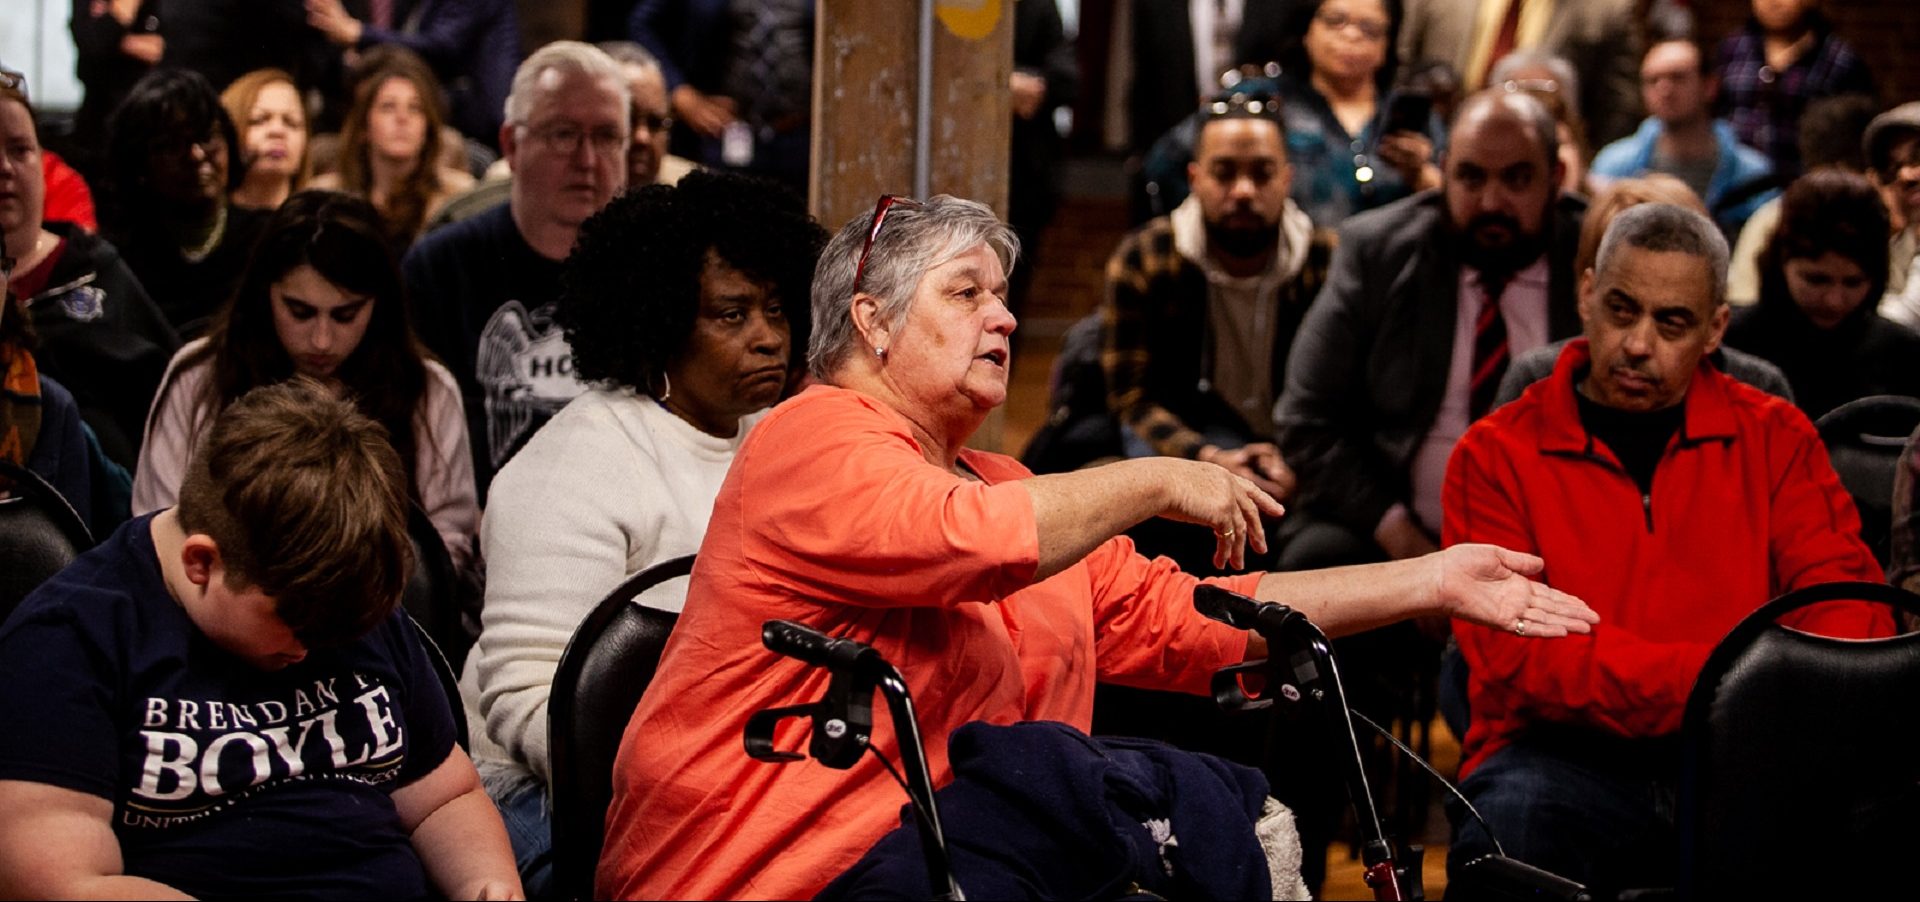 Kensington resident Donna Aument voiced her opposisiton to a proposed safe injection site at a meeting to update residents on the ongoing Philadelphia Resilience Project's efforts in combating the opioid epidemic.